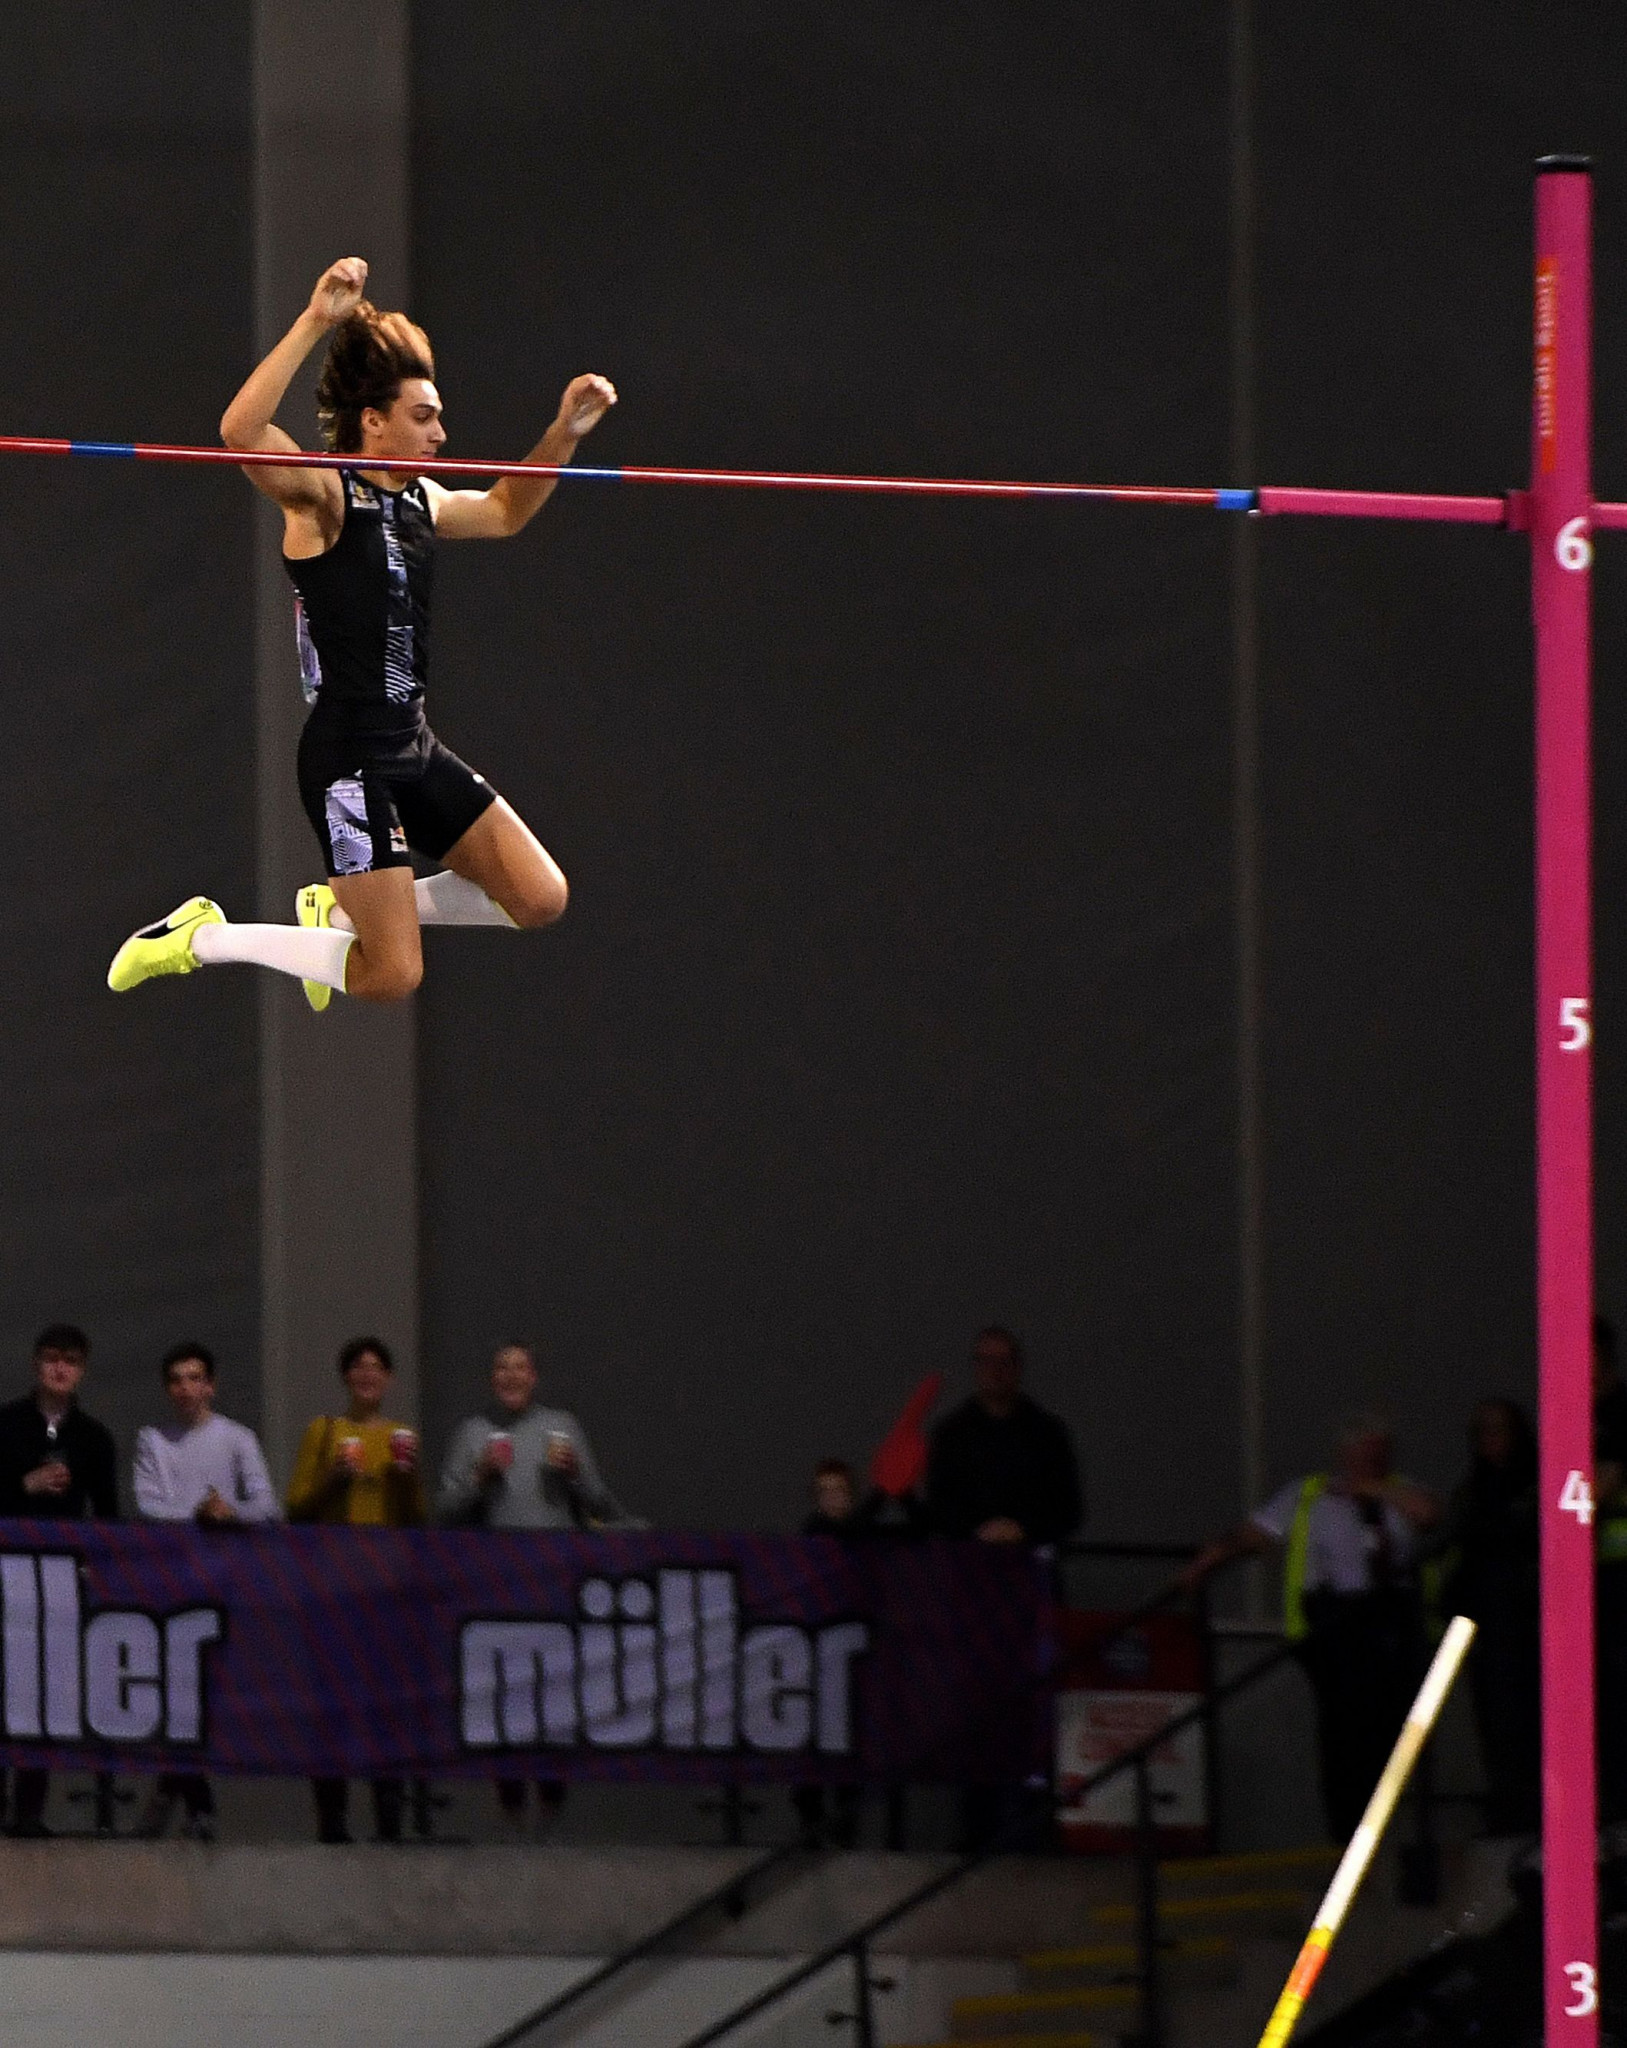 Armand Duplantis is seeking a third pole vault world record in the space of 12 days when he competes in Liévin tomorrow ©Getty Images